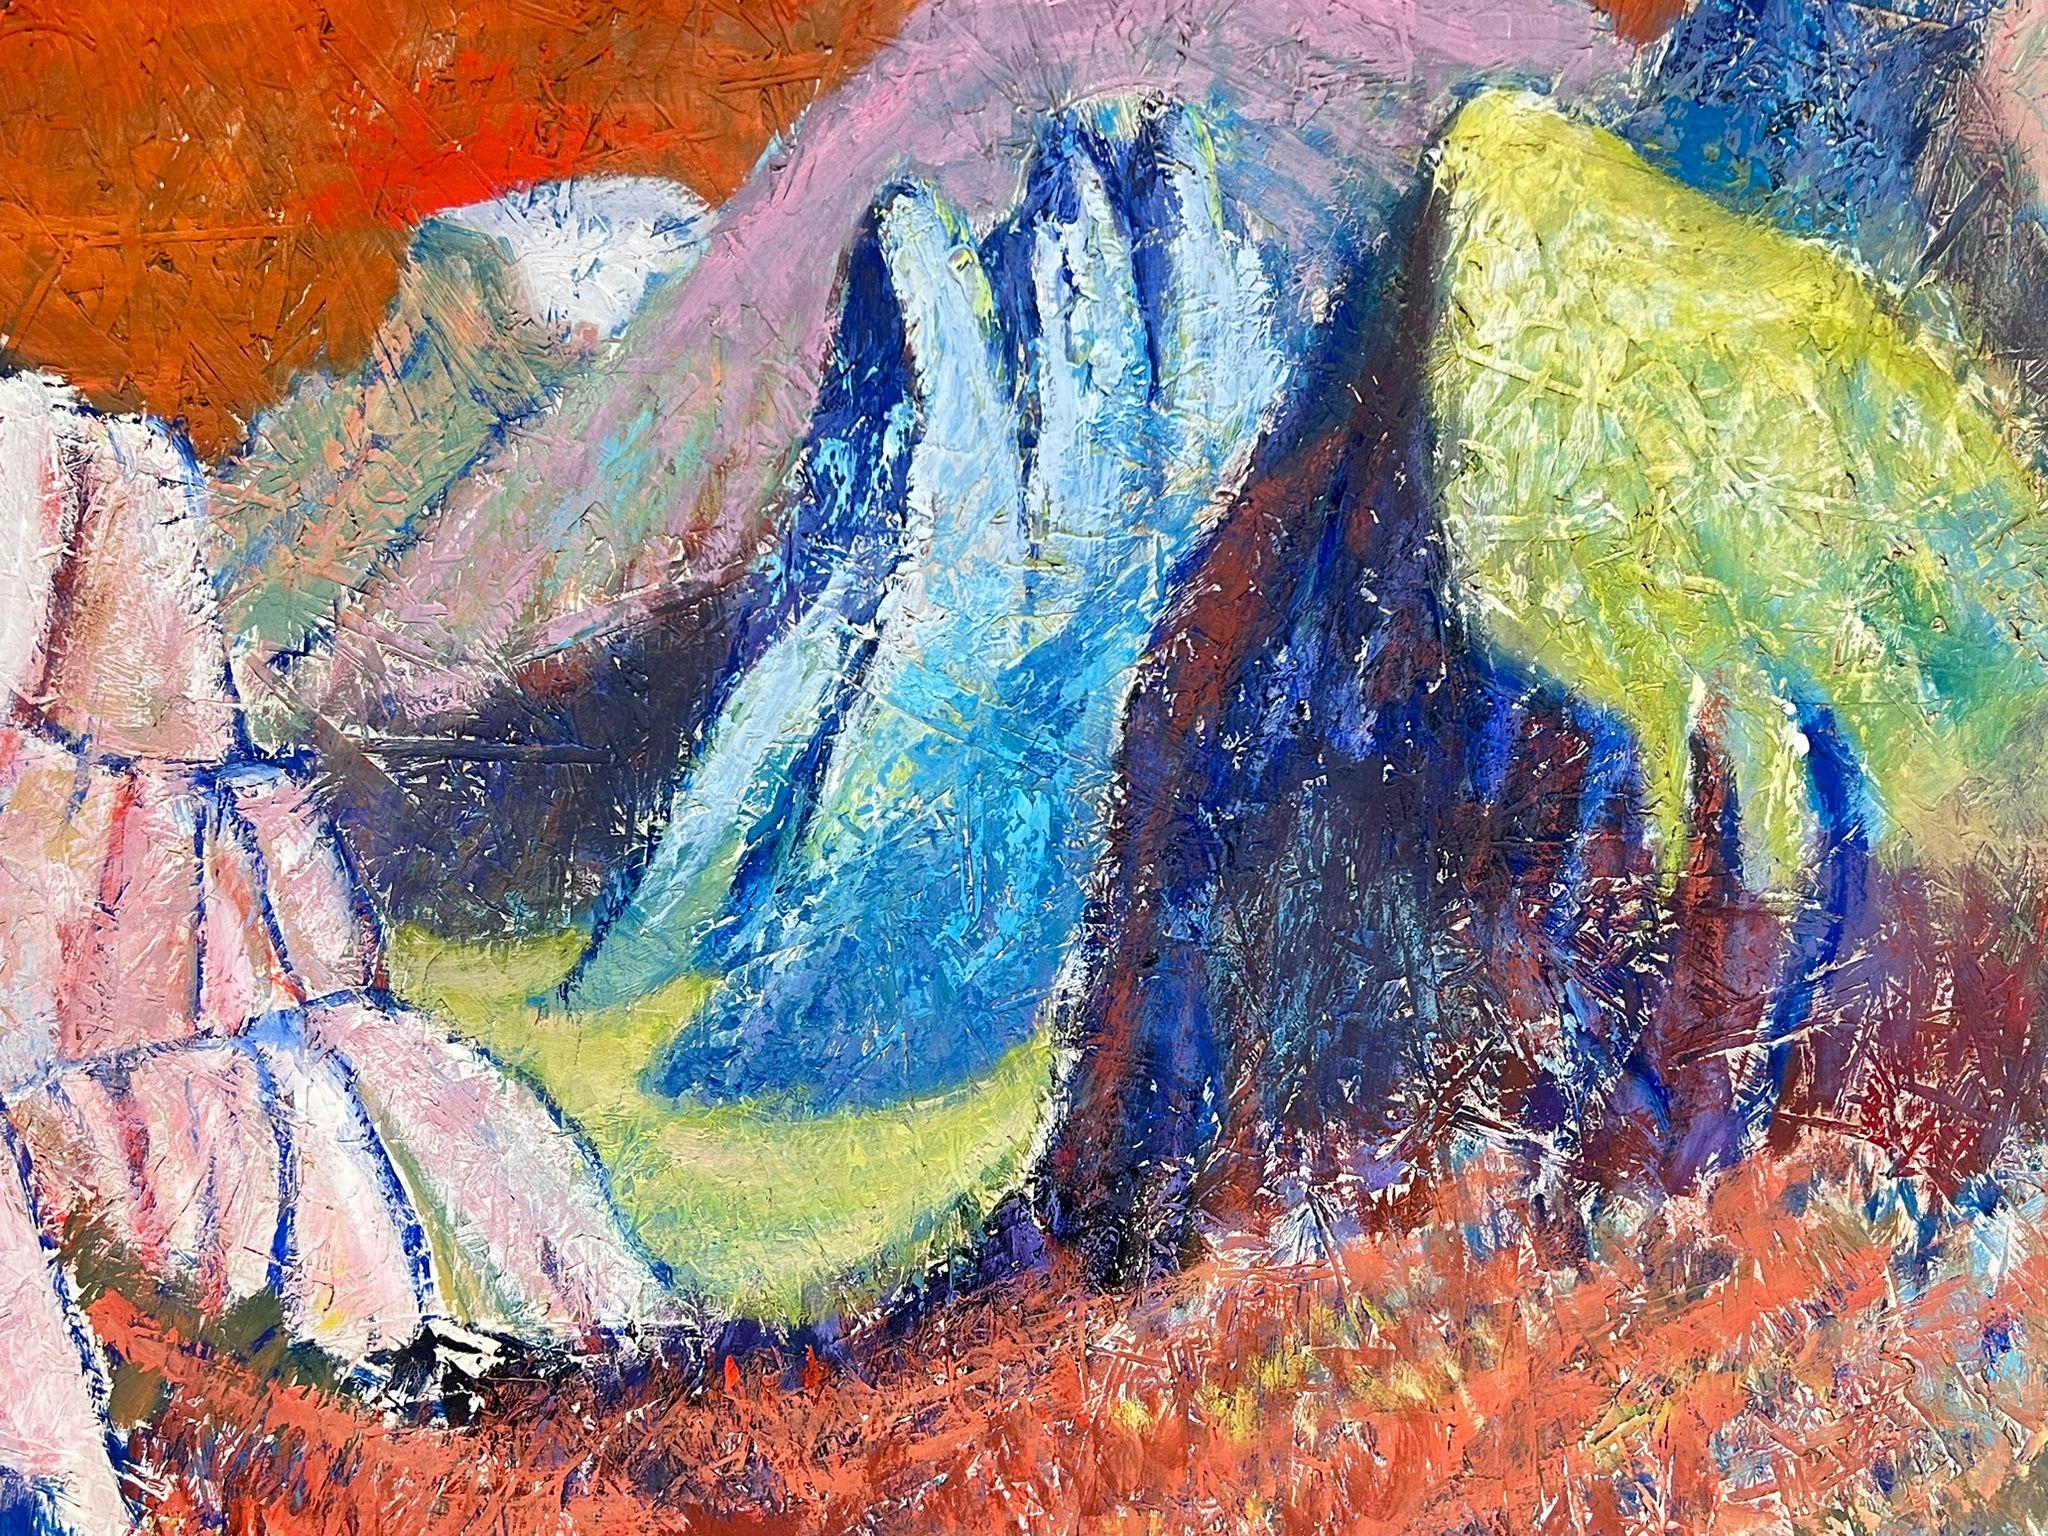 20th Century British Modernist Abstract Colourful Mountains Red Sky - Impressionist Painting by Helen Greenfield